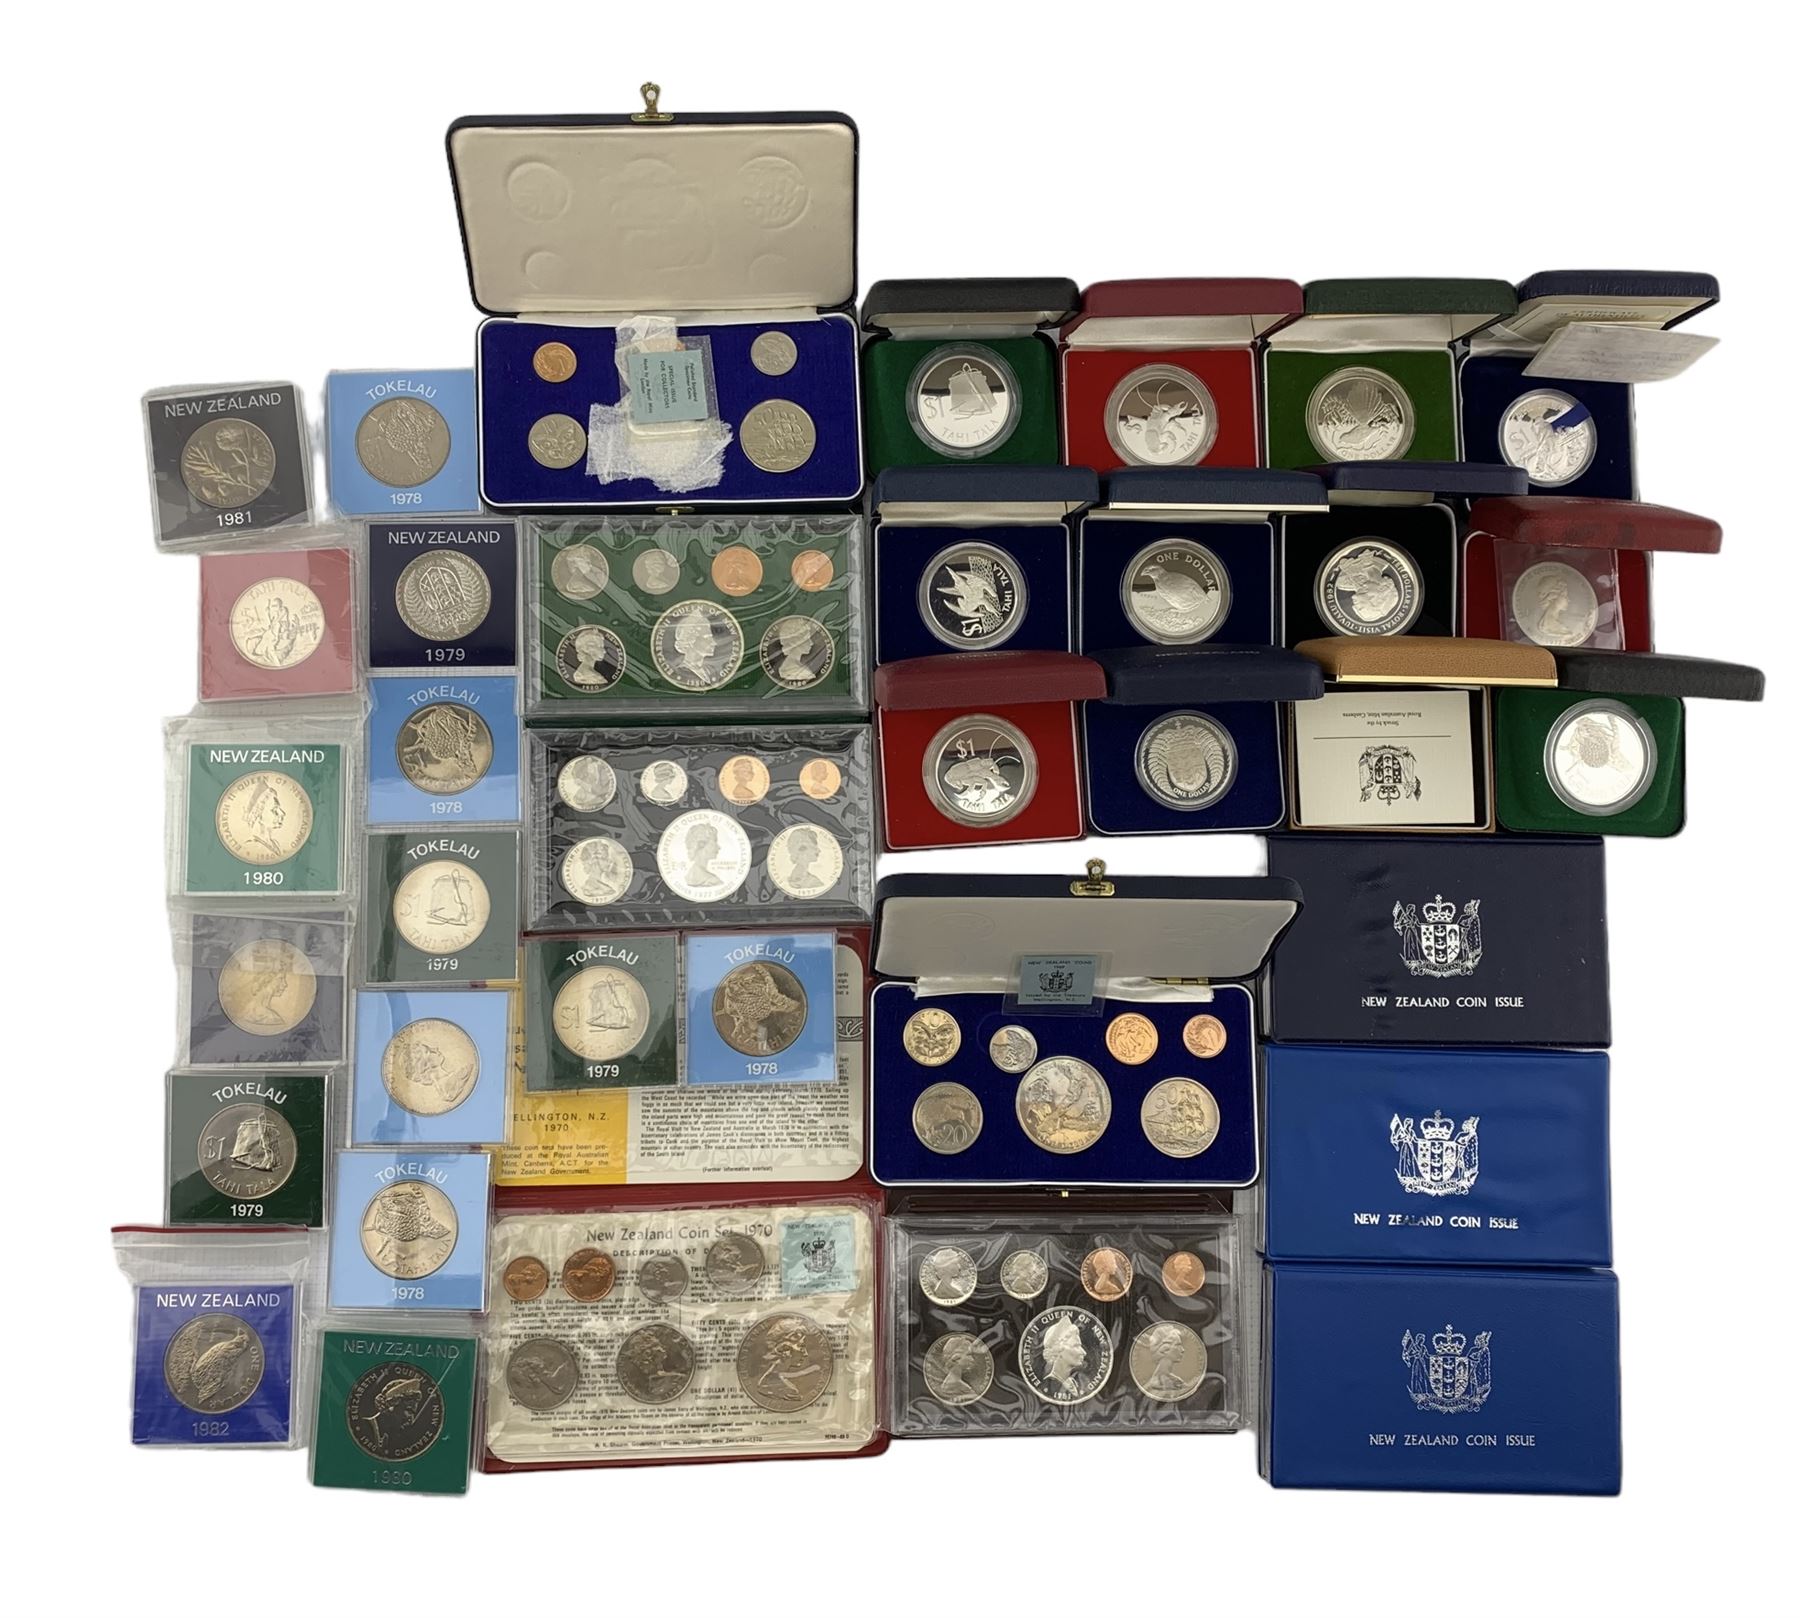 New Zealand proof coins and sets including 1977